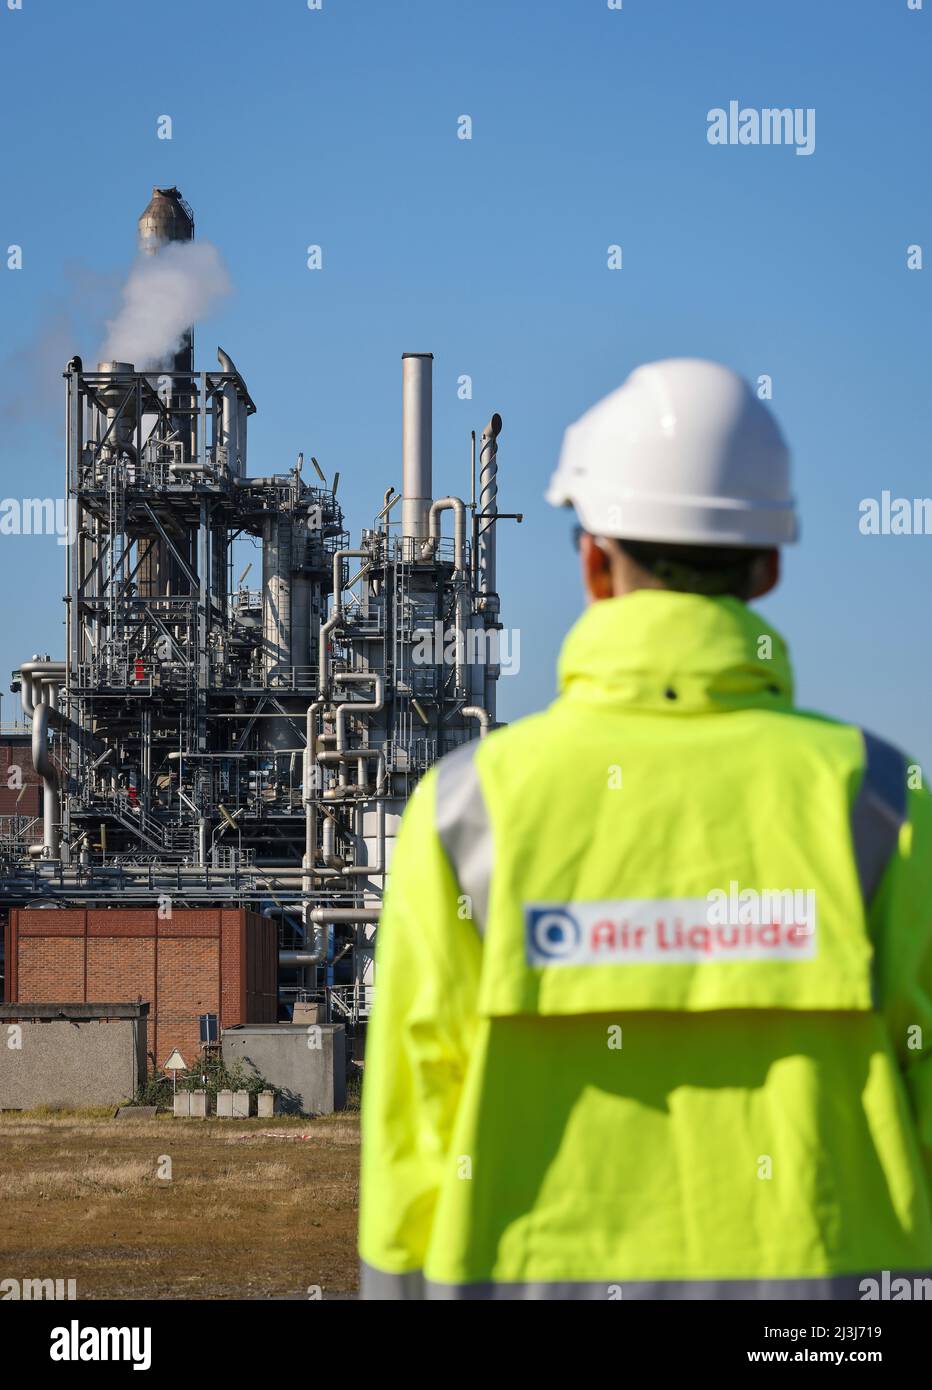 Oberhausen, North Rhine-Westphalia, Germany - Air Liquide, hydrogen production in the chemical park OQ Chemicals. Air Liquid employee with company logo on yellow jacket in front of POX (partial oxidation) plant for conventional production of hydrogen and synthesis gas. Stock Photo